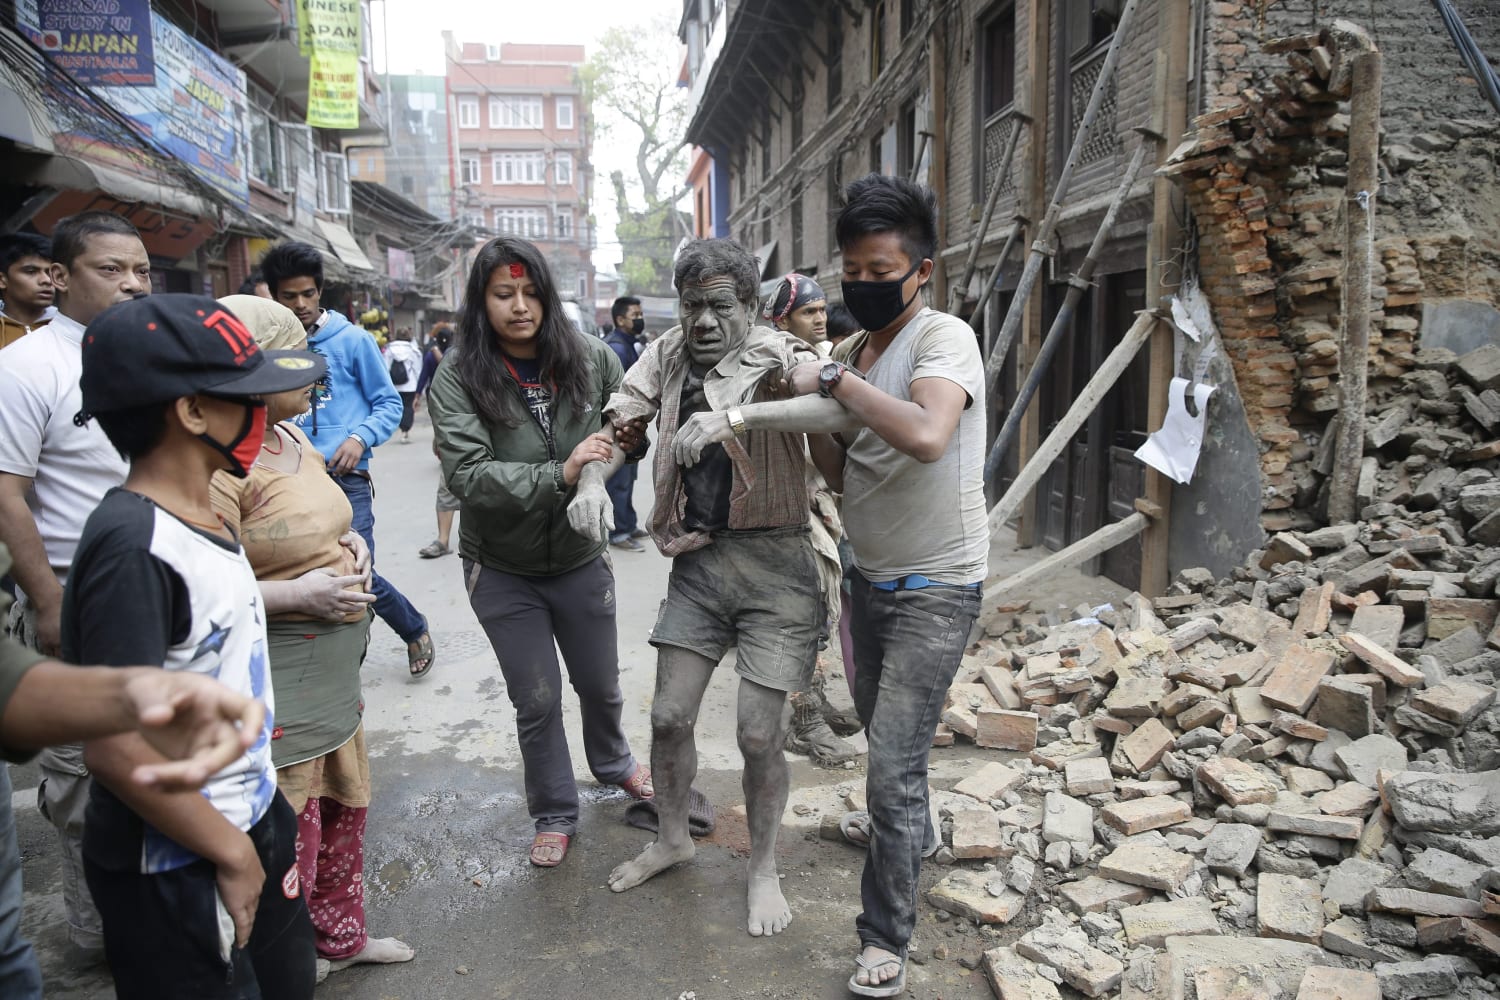 Nepal Earthquake: Nearly 1,400 Dead After 7.8-Magnitude Tremor.